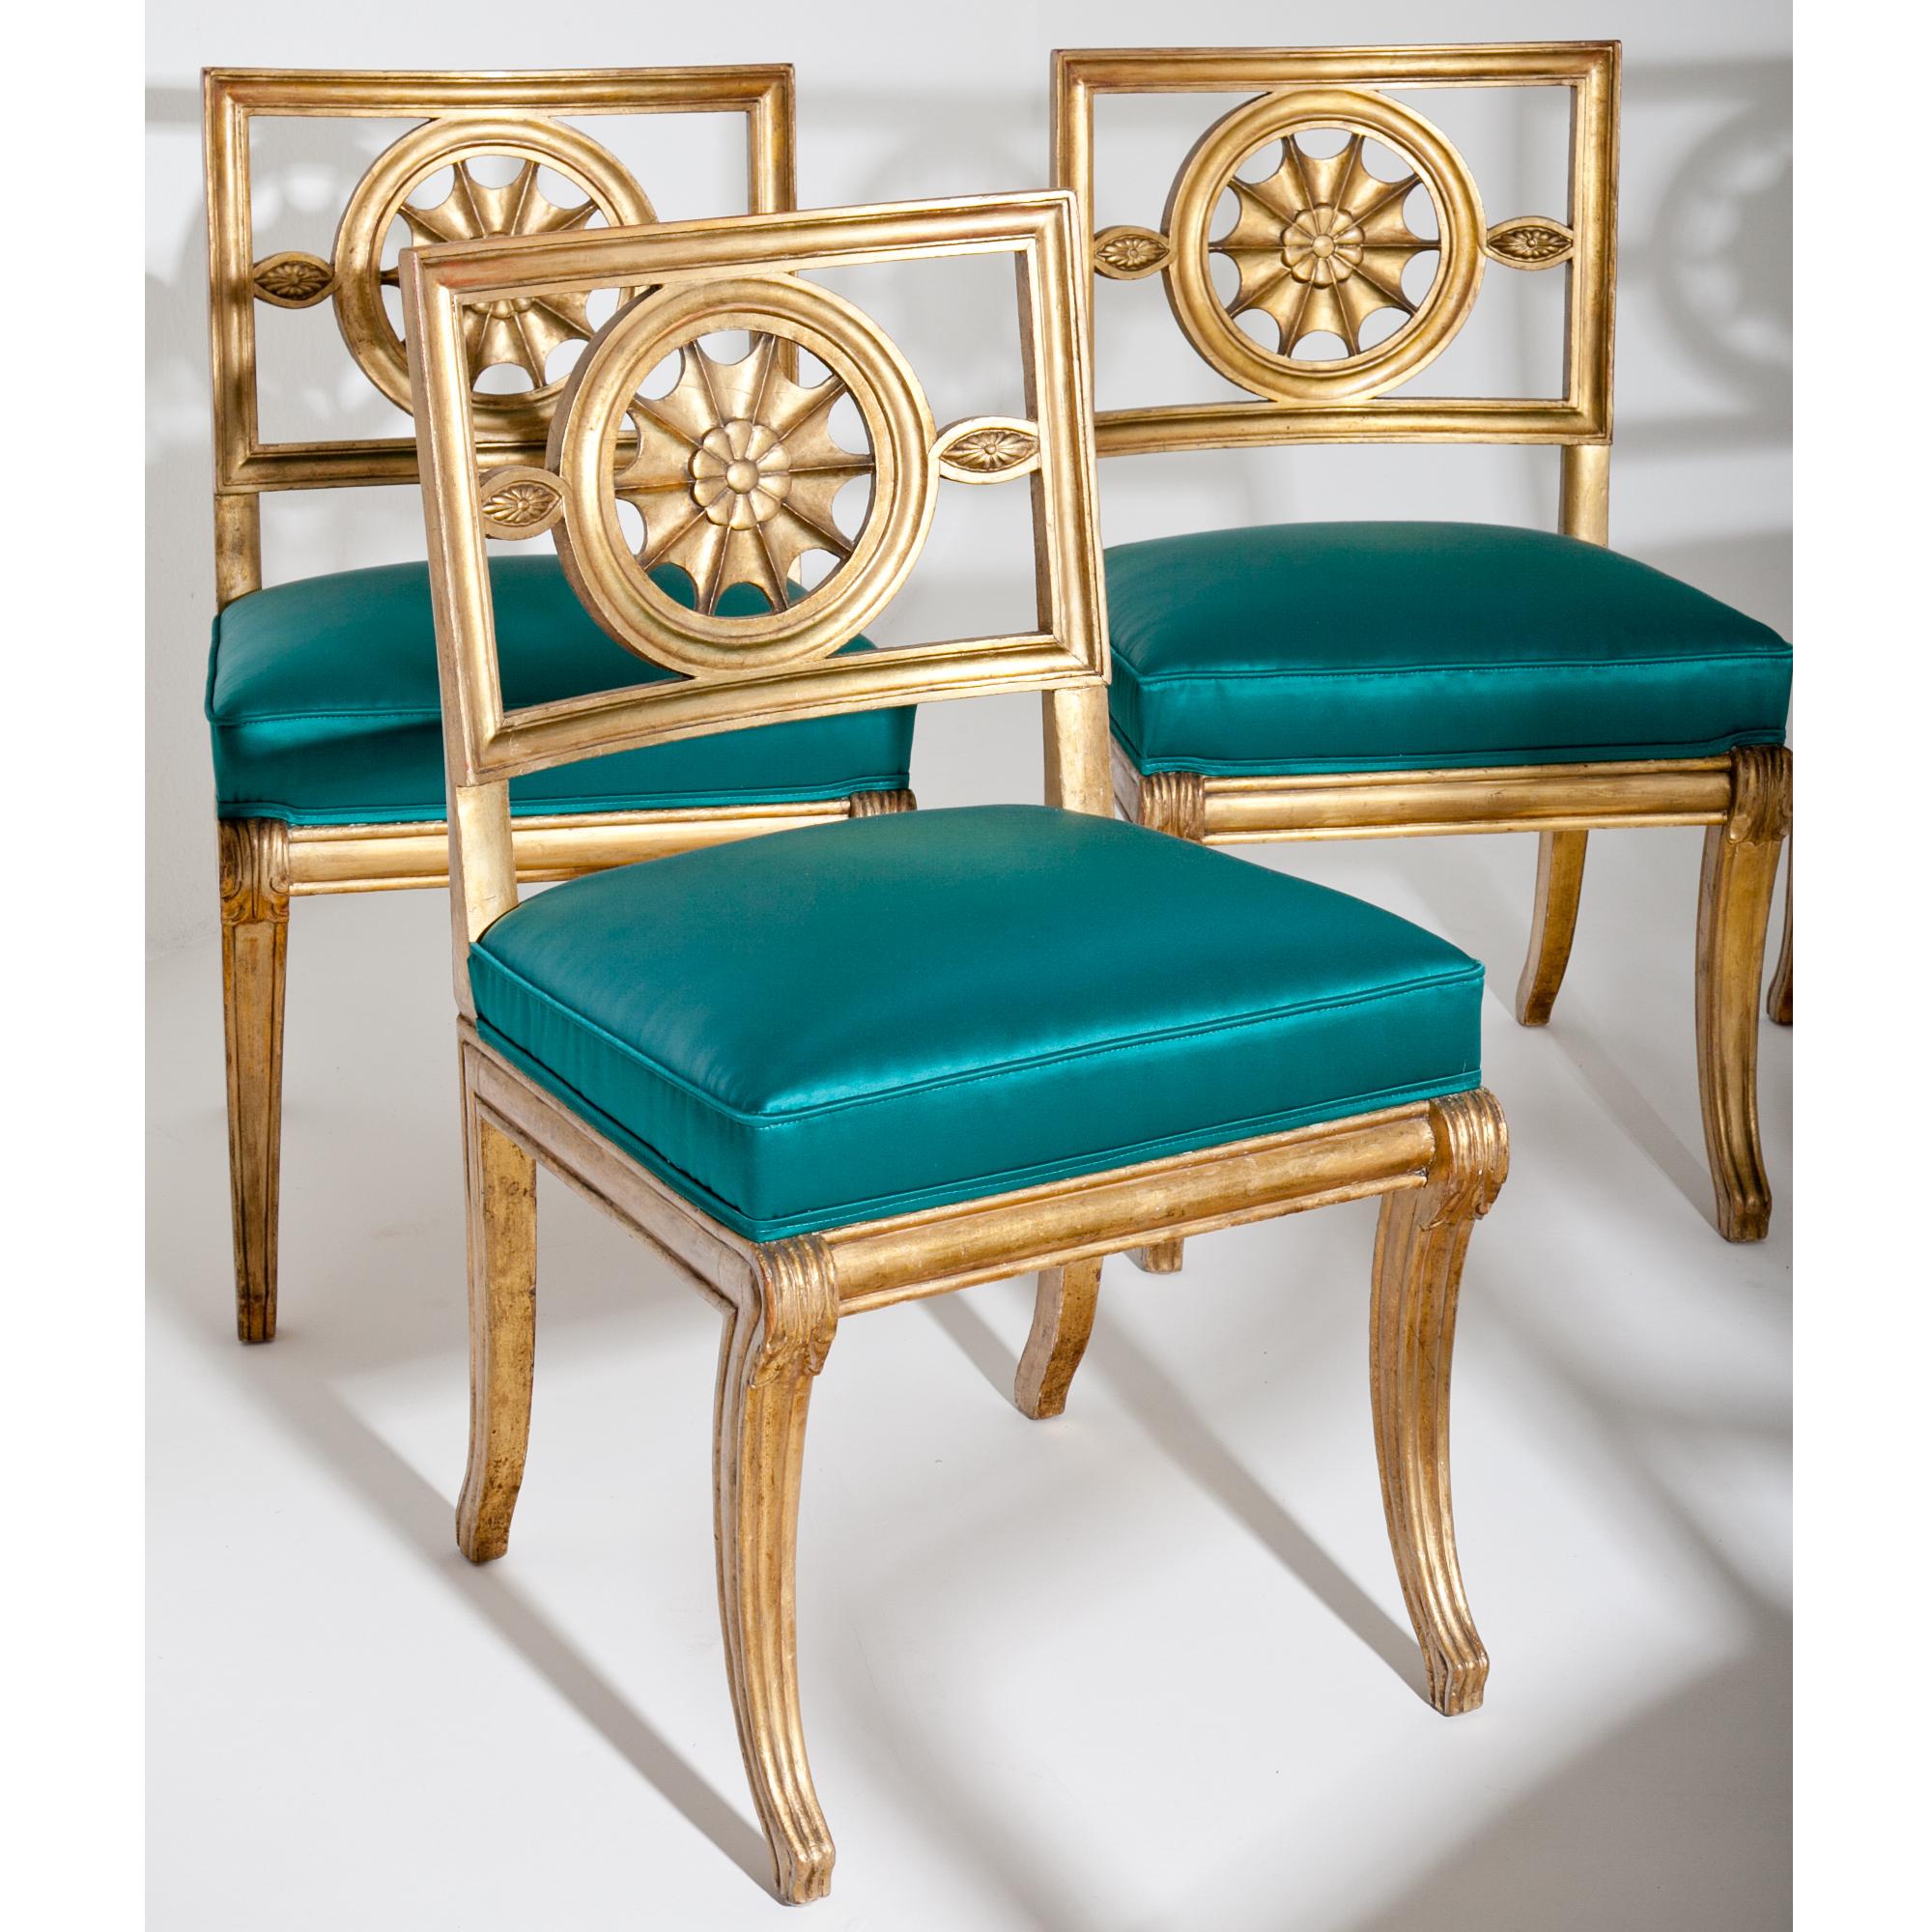 Neoclassical Chairs, Berlin First Half of the 19th Century 6